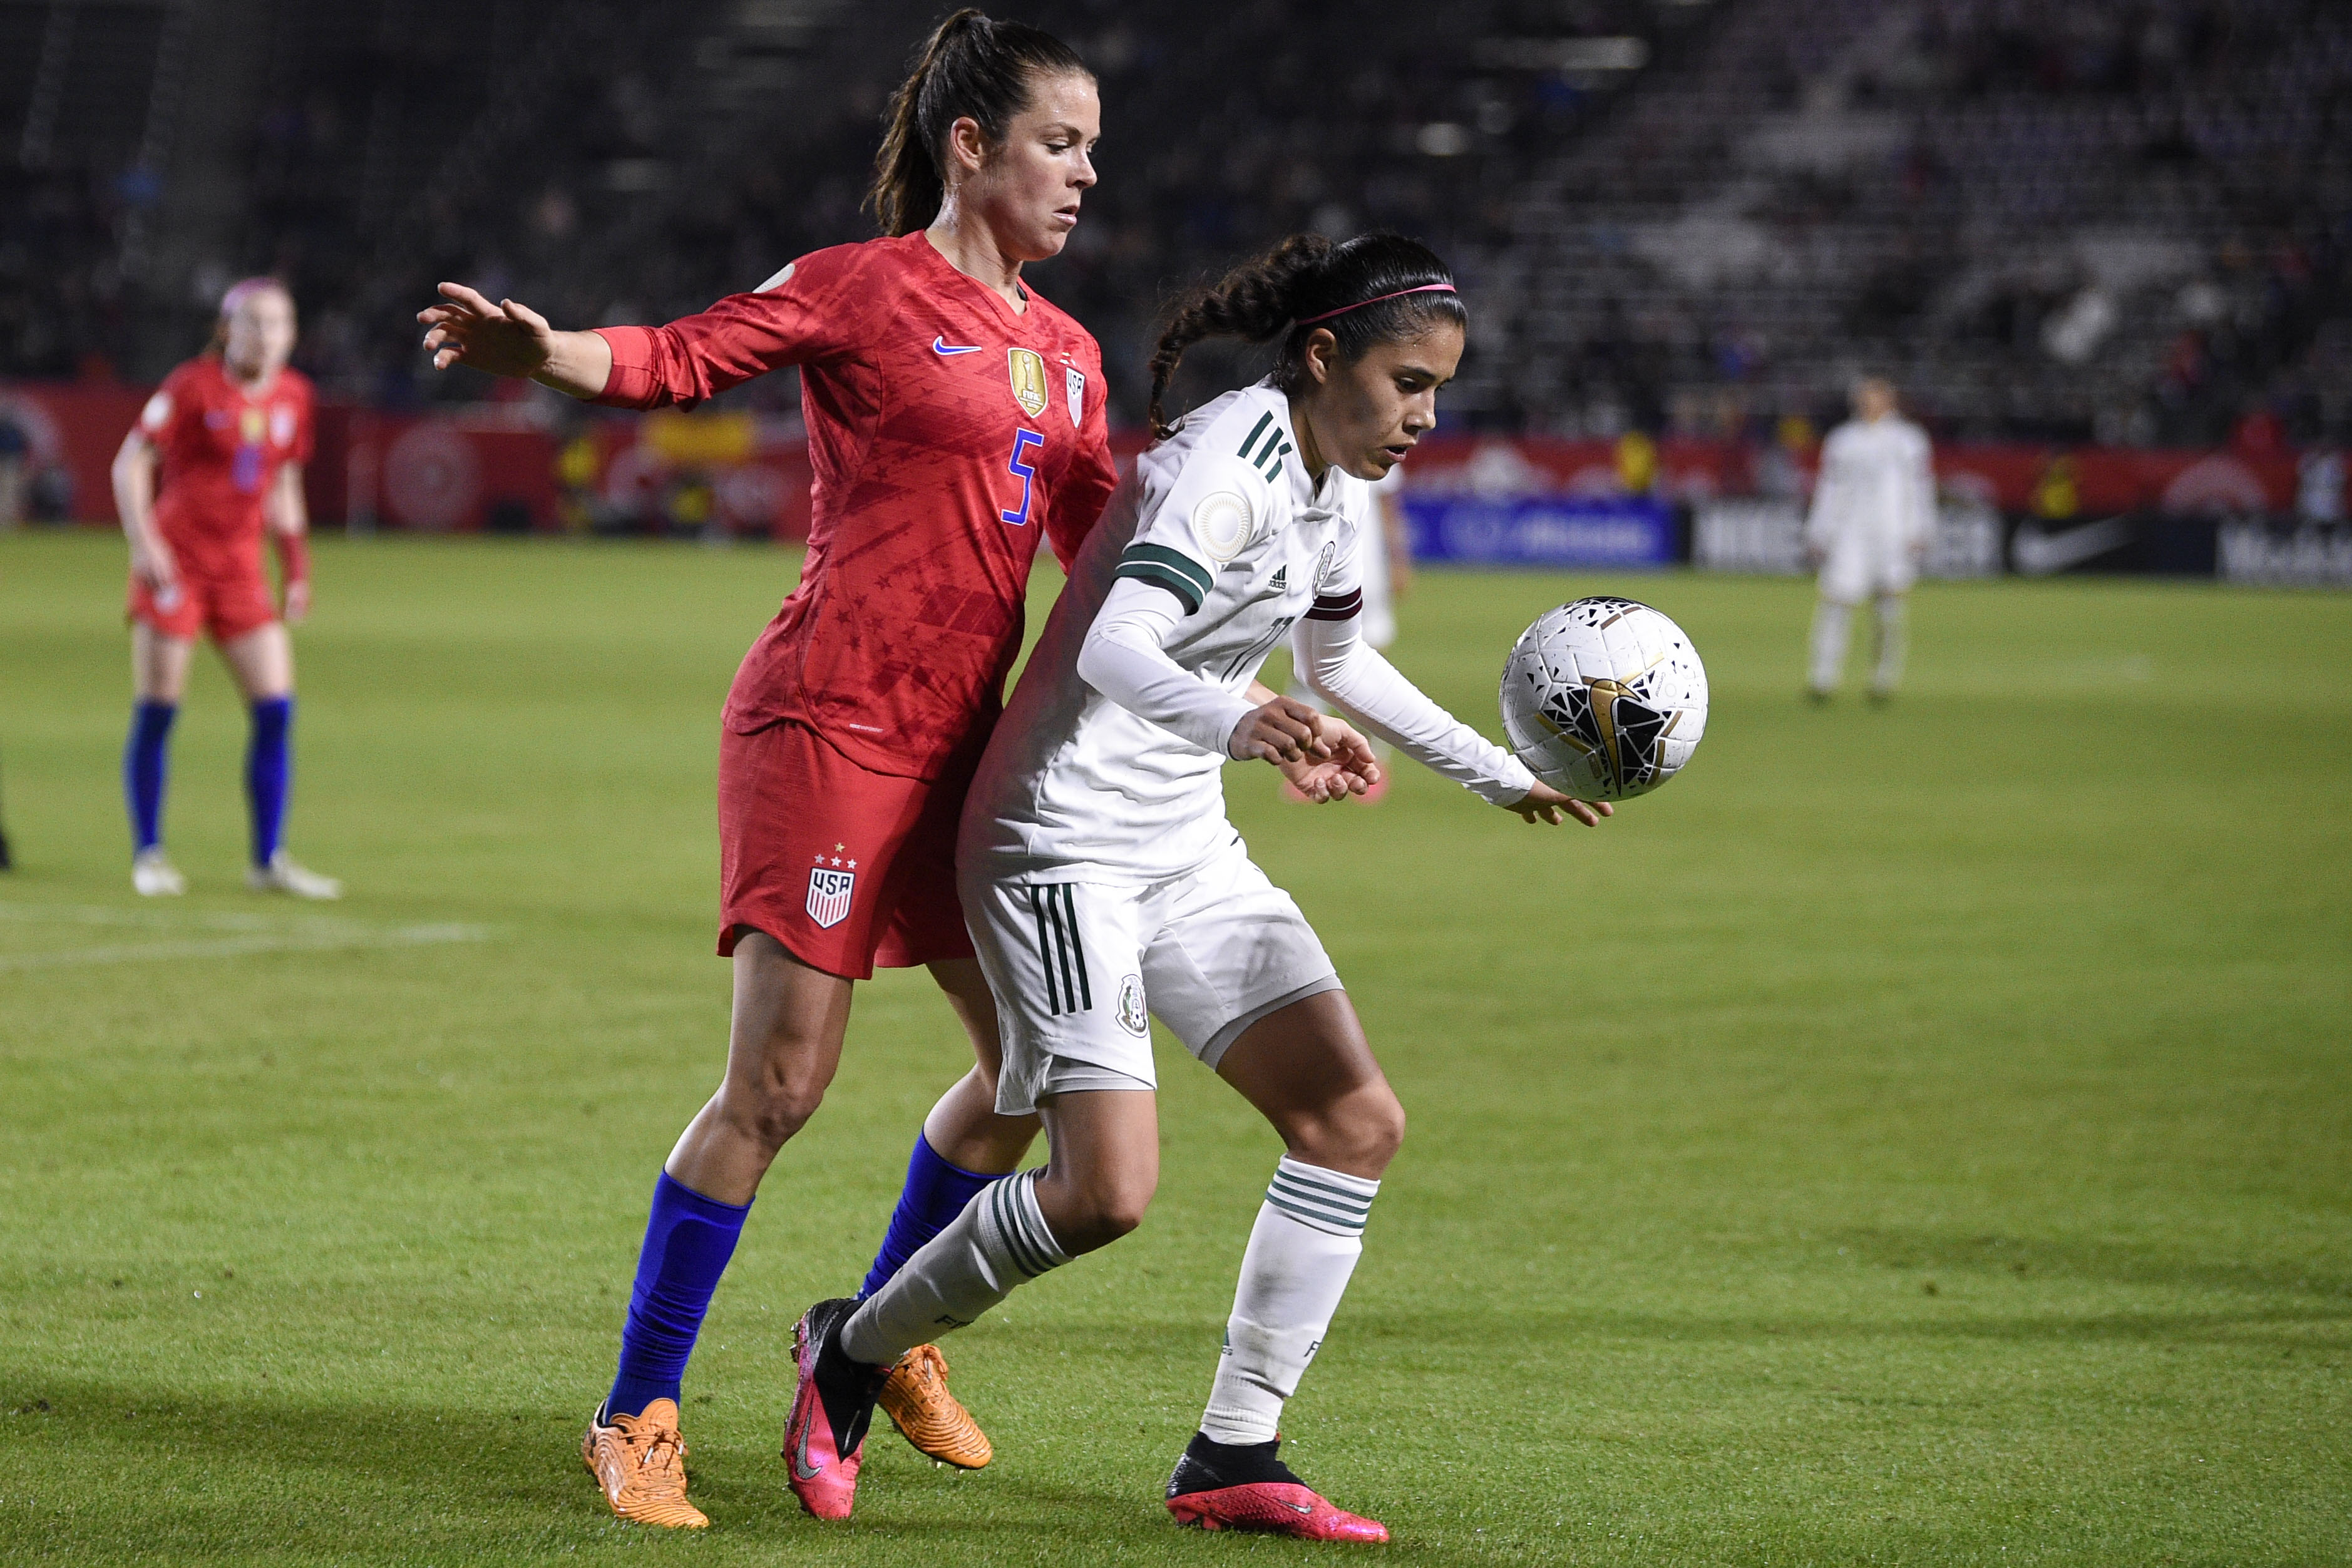 Feb 7, 2020; Los Angeles, California, USA; Mexico midfielder Jacqueline Ovalle (11) handles the ball while pressured by United States defender Kelley O'hara (5) during the second half of the CONCACAF Women's Olympic Qualifying soccer tournament at Dignity Health Sports Park. Mandatory Credit: Kelvin Kuo-USA TODAY Sports